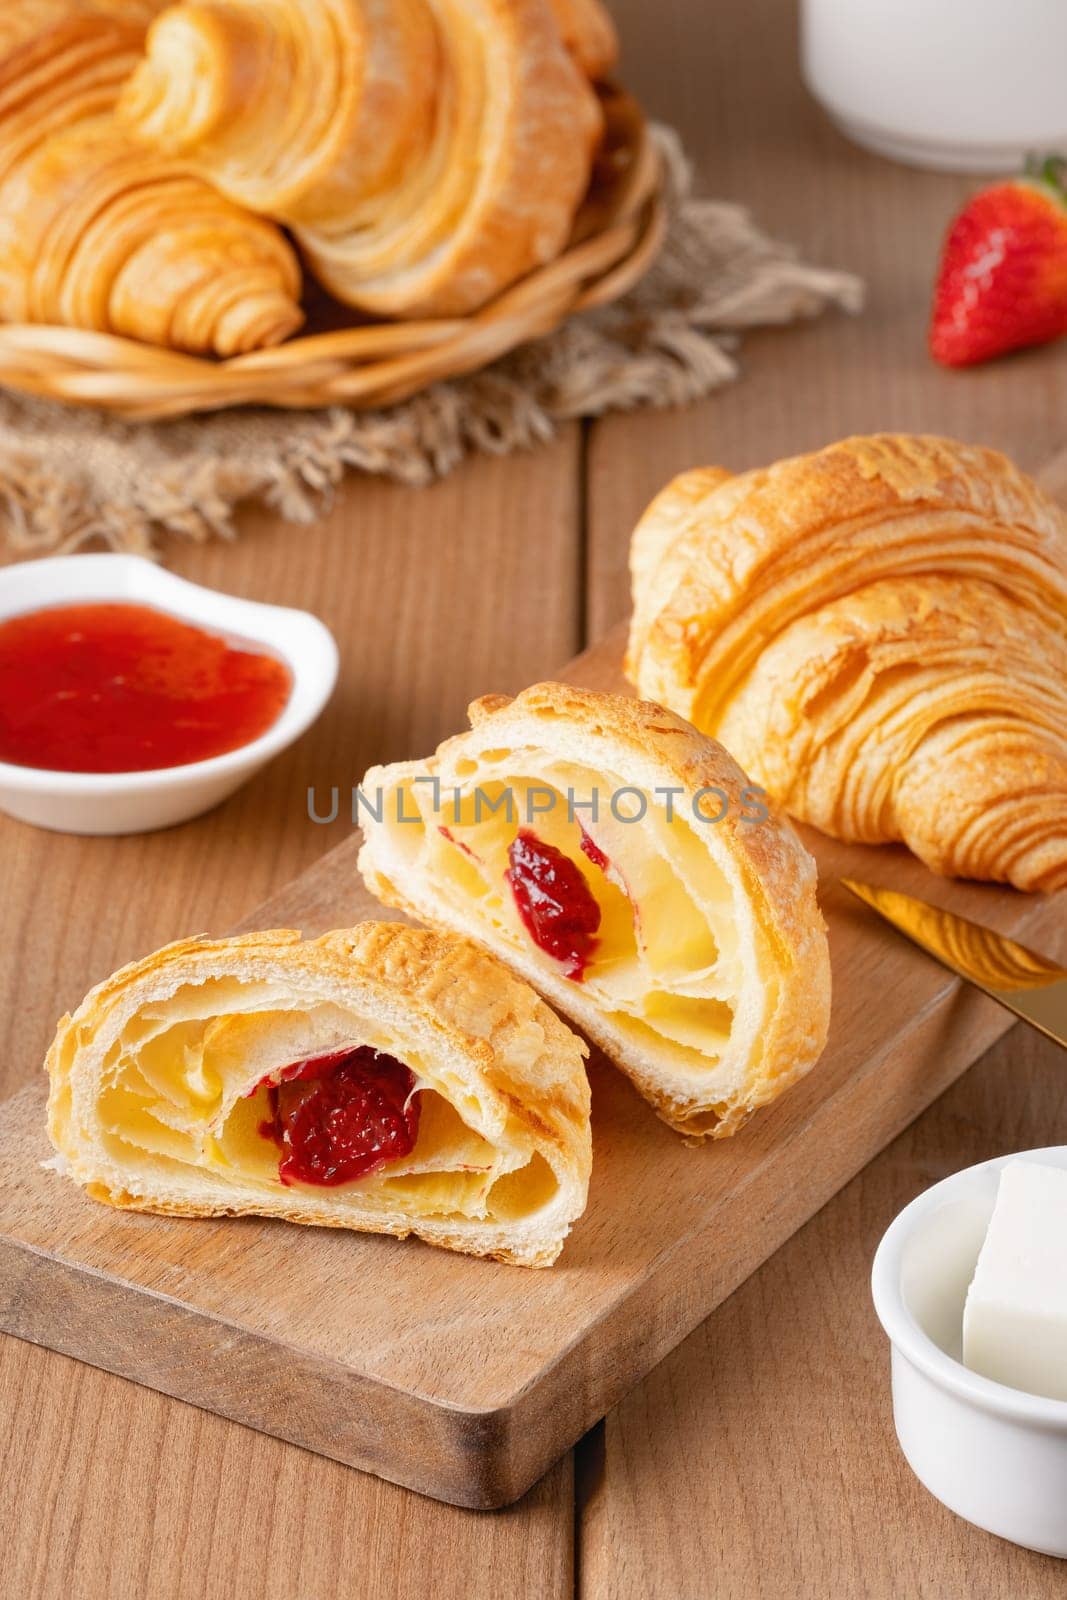 Freshly baked croissants with butter, strawberry jam and tea for breakfast.